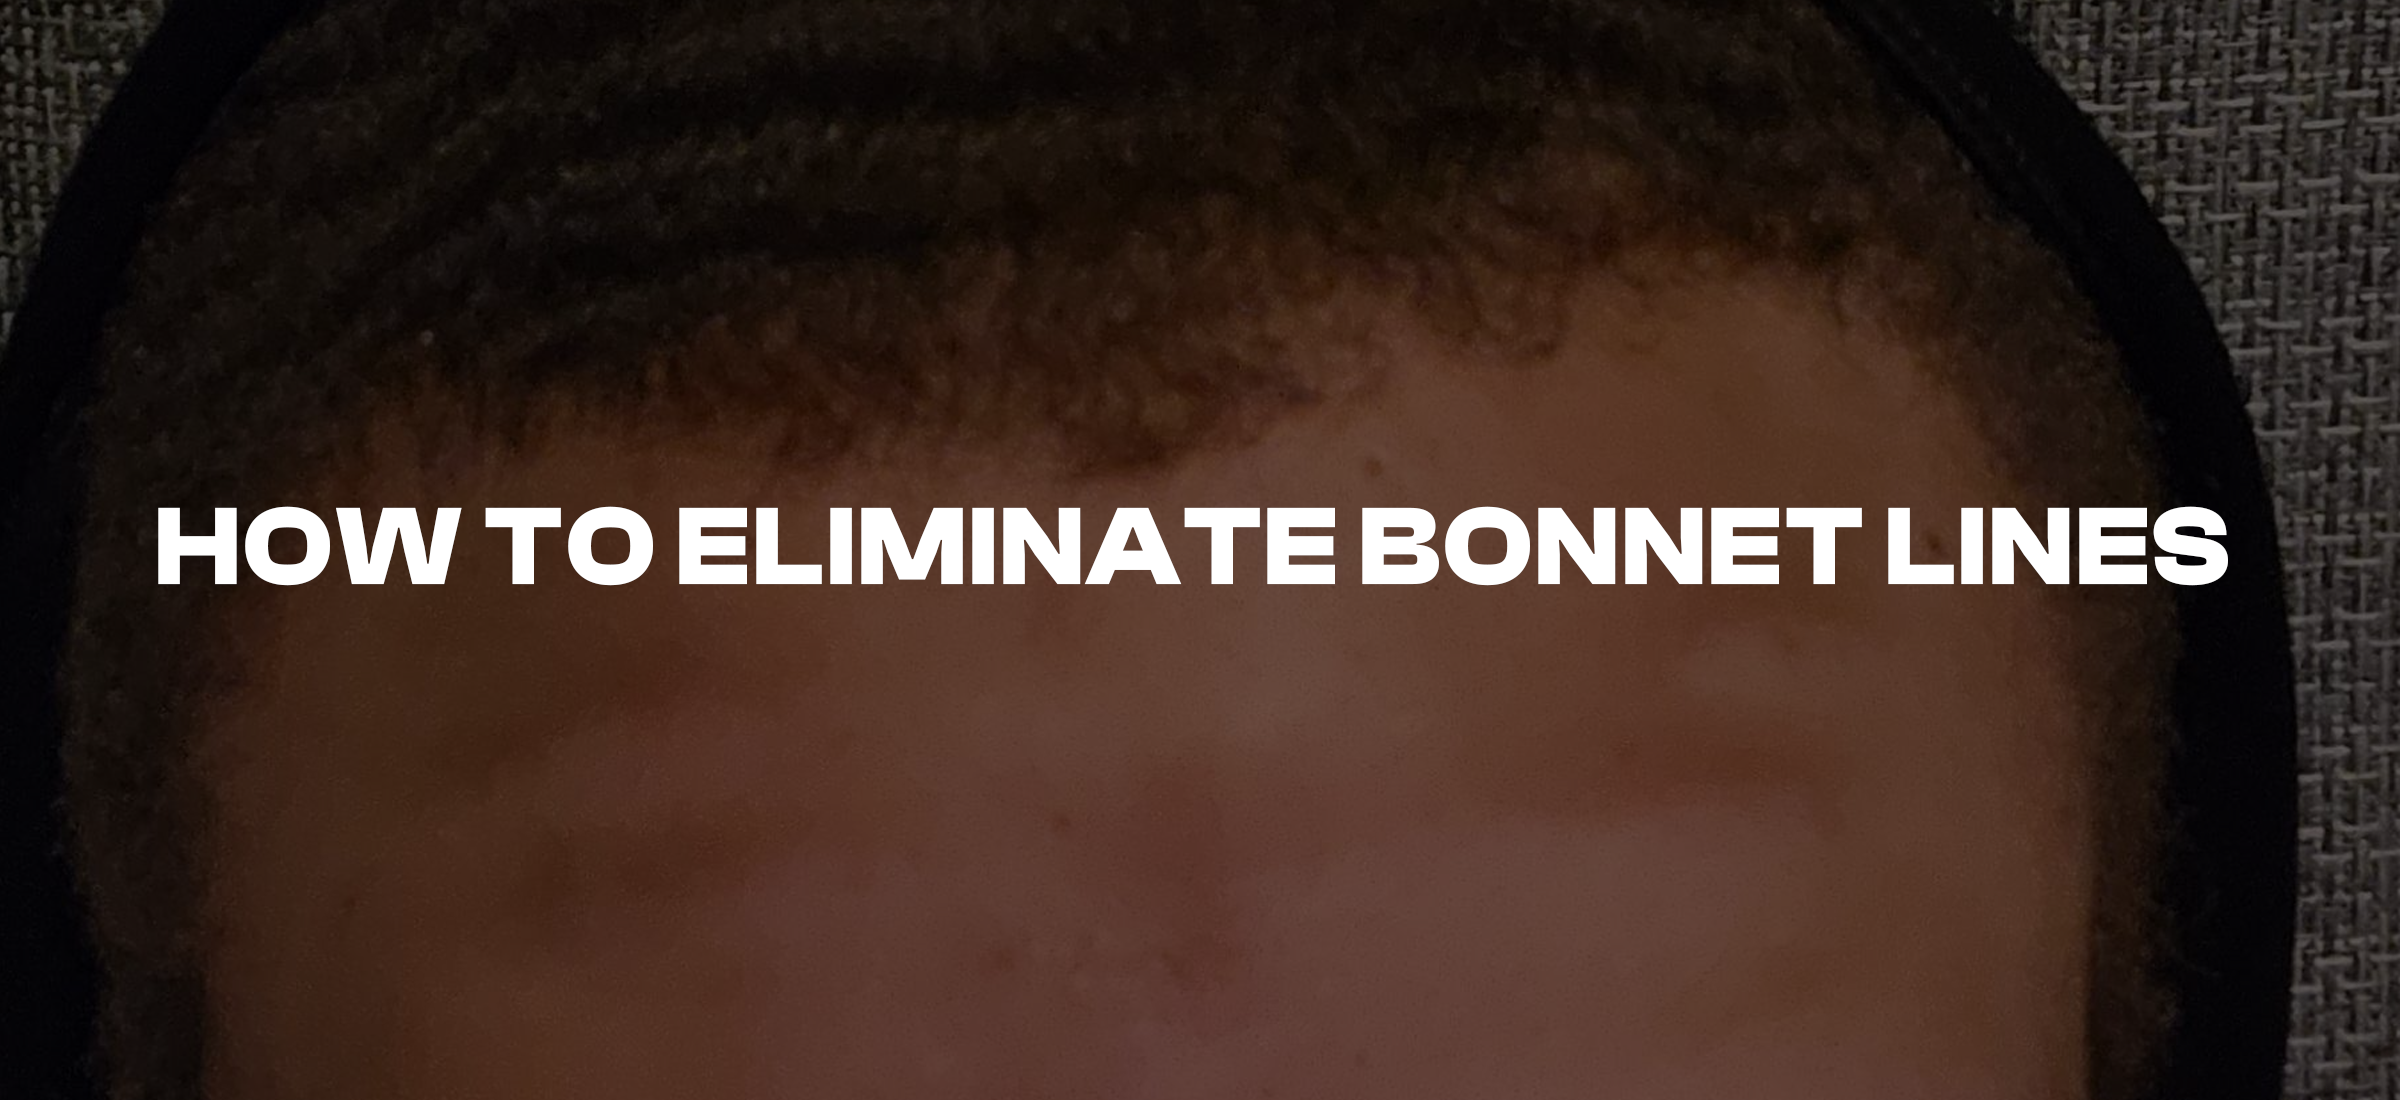 How to Eliminate Bonnet Lines on Your Forehead: Expert Tips and Tricks